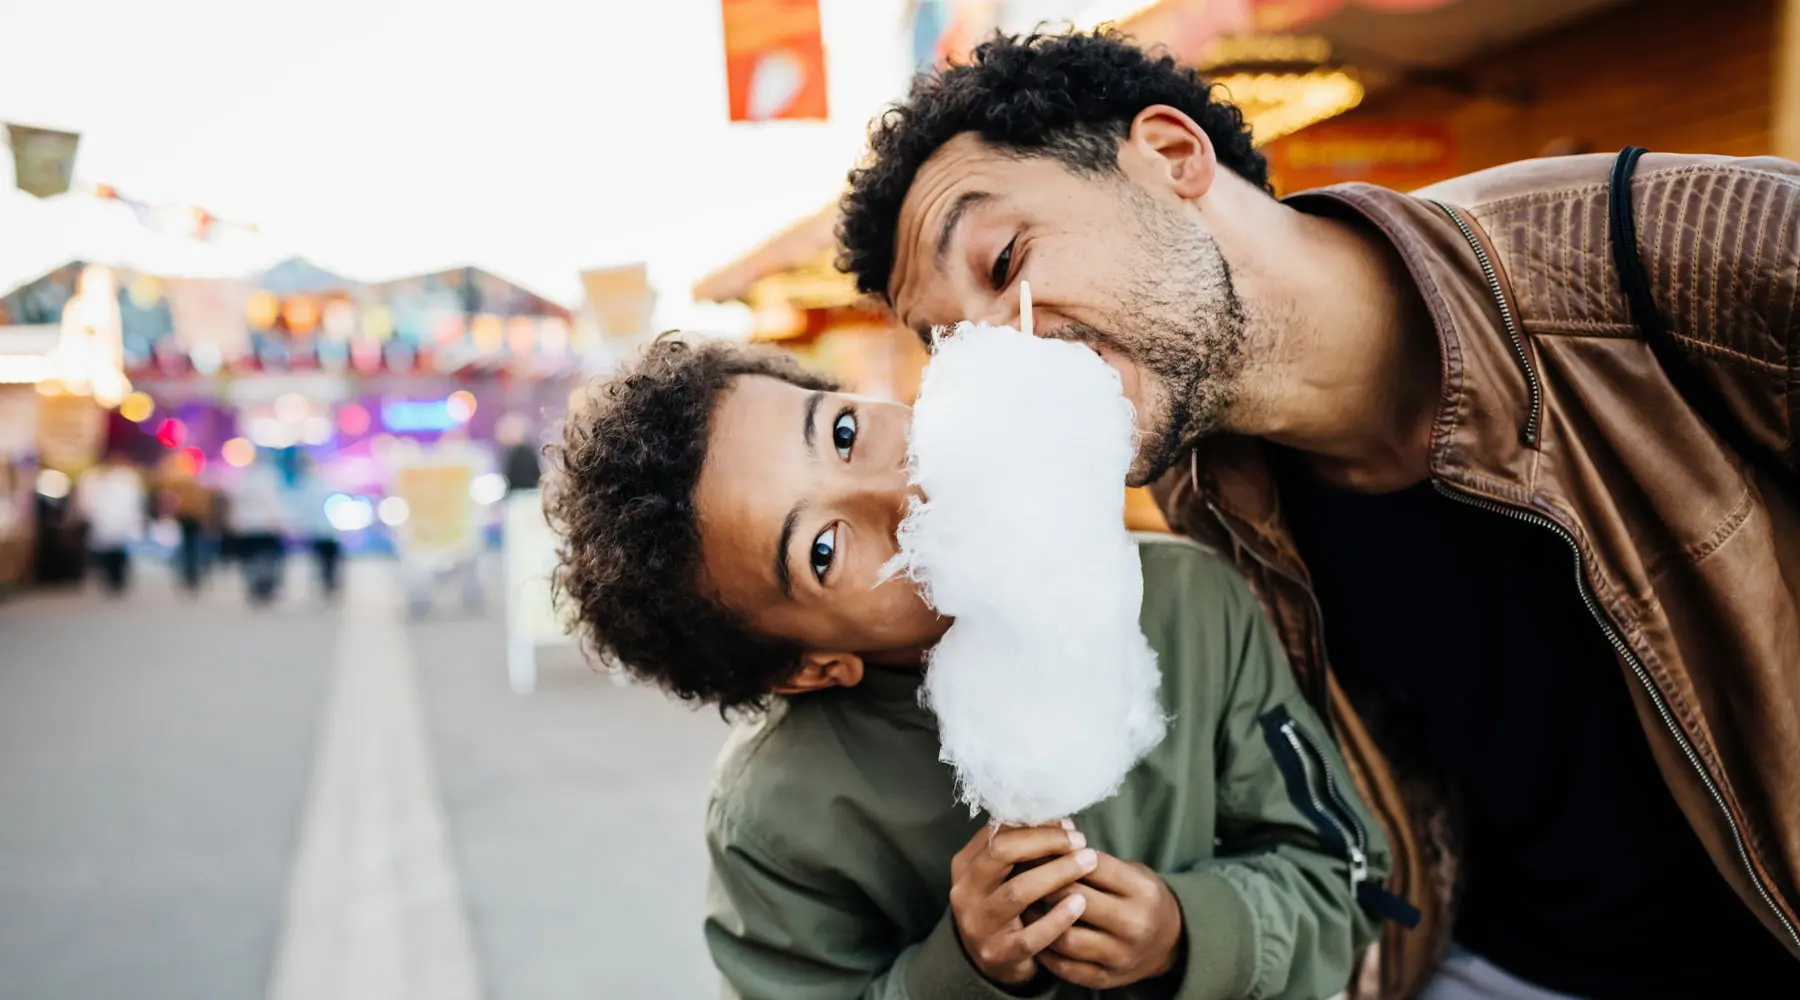 A playful father and son sharing a bloom of candy floss while spending the day at the fun fair together.